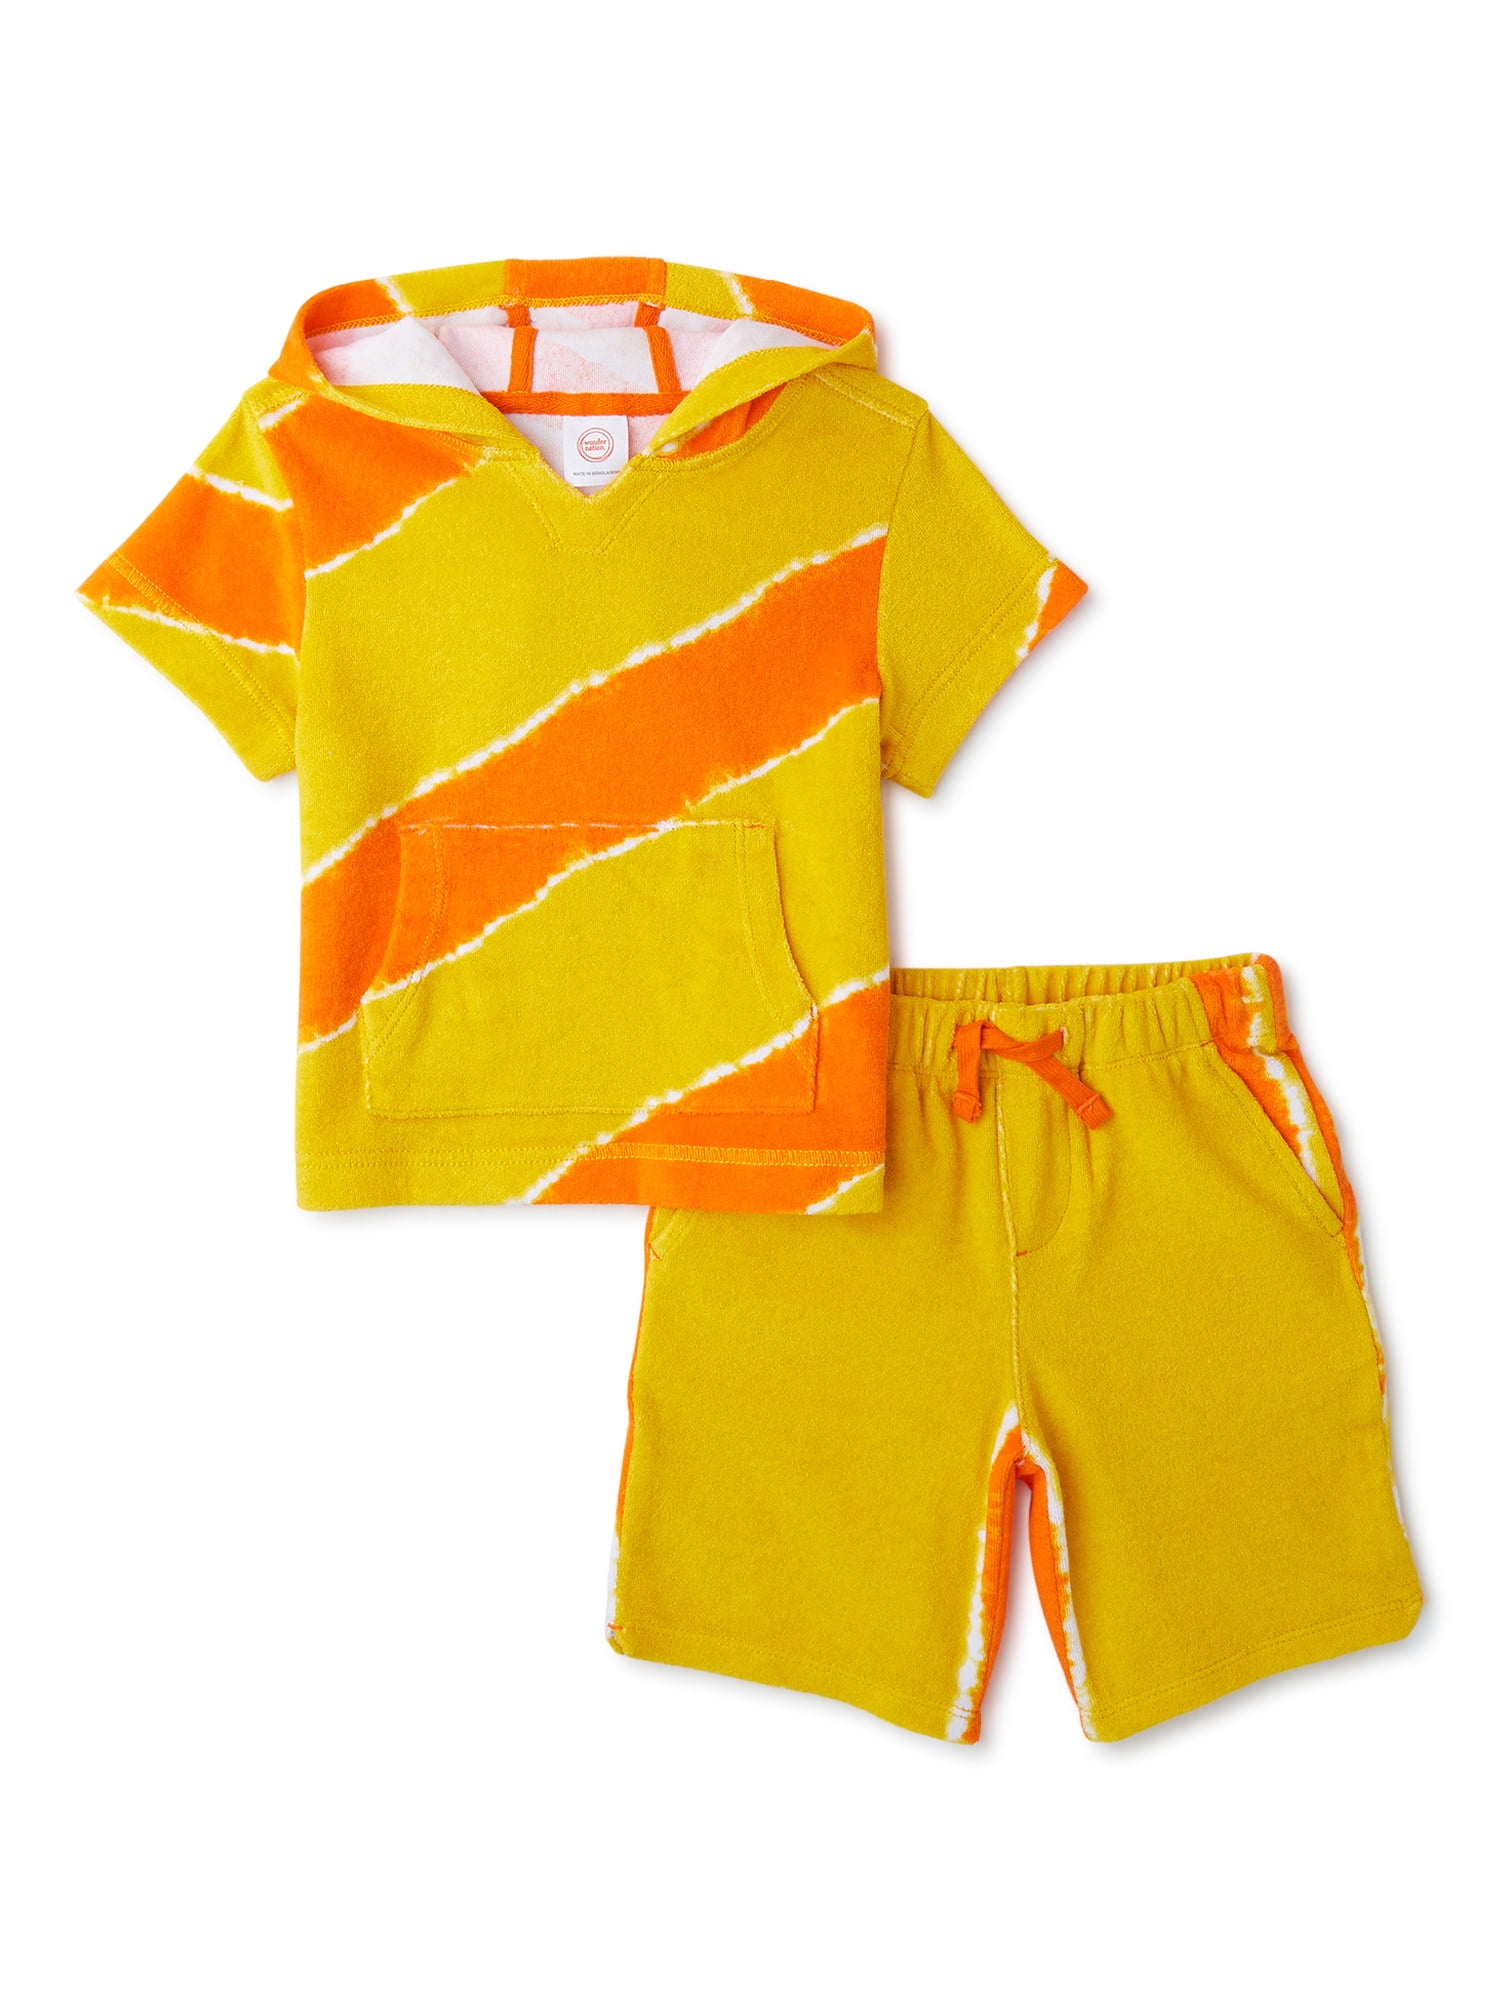 Wonder Nation Baby Terry 2-Piece, 12M-5T Set, and Outfit Towel Boys\' Toddler